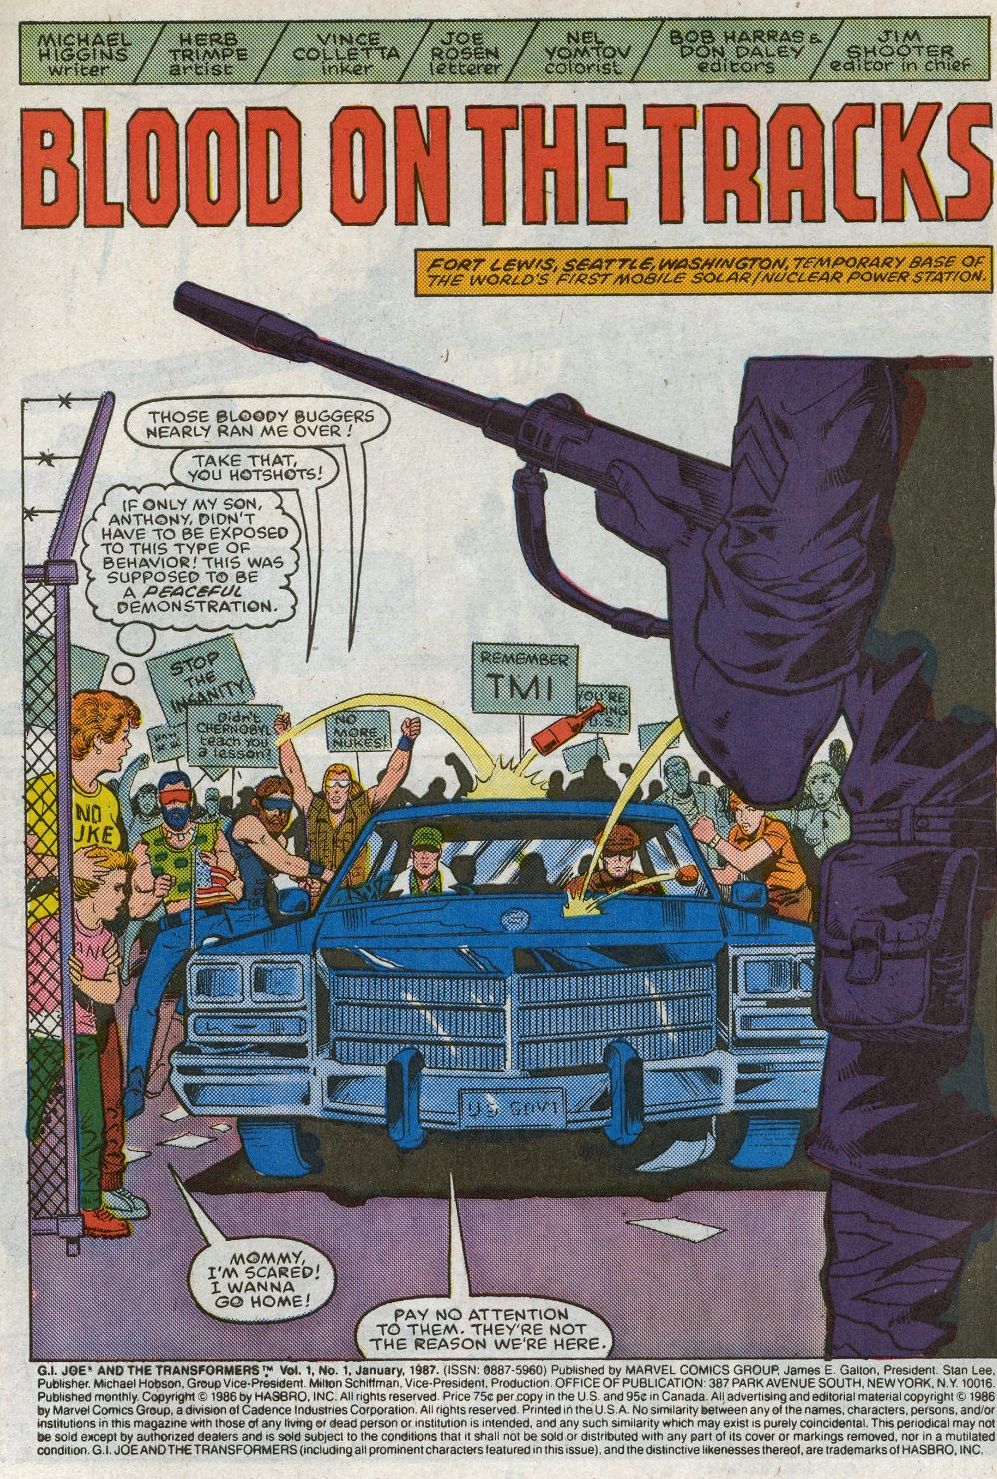 A Dylan title reference in the debut of the GI Joe/Transformers crossover